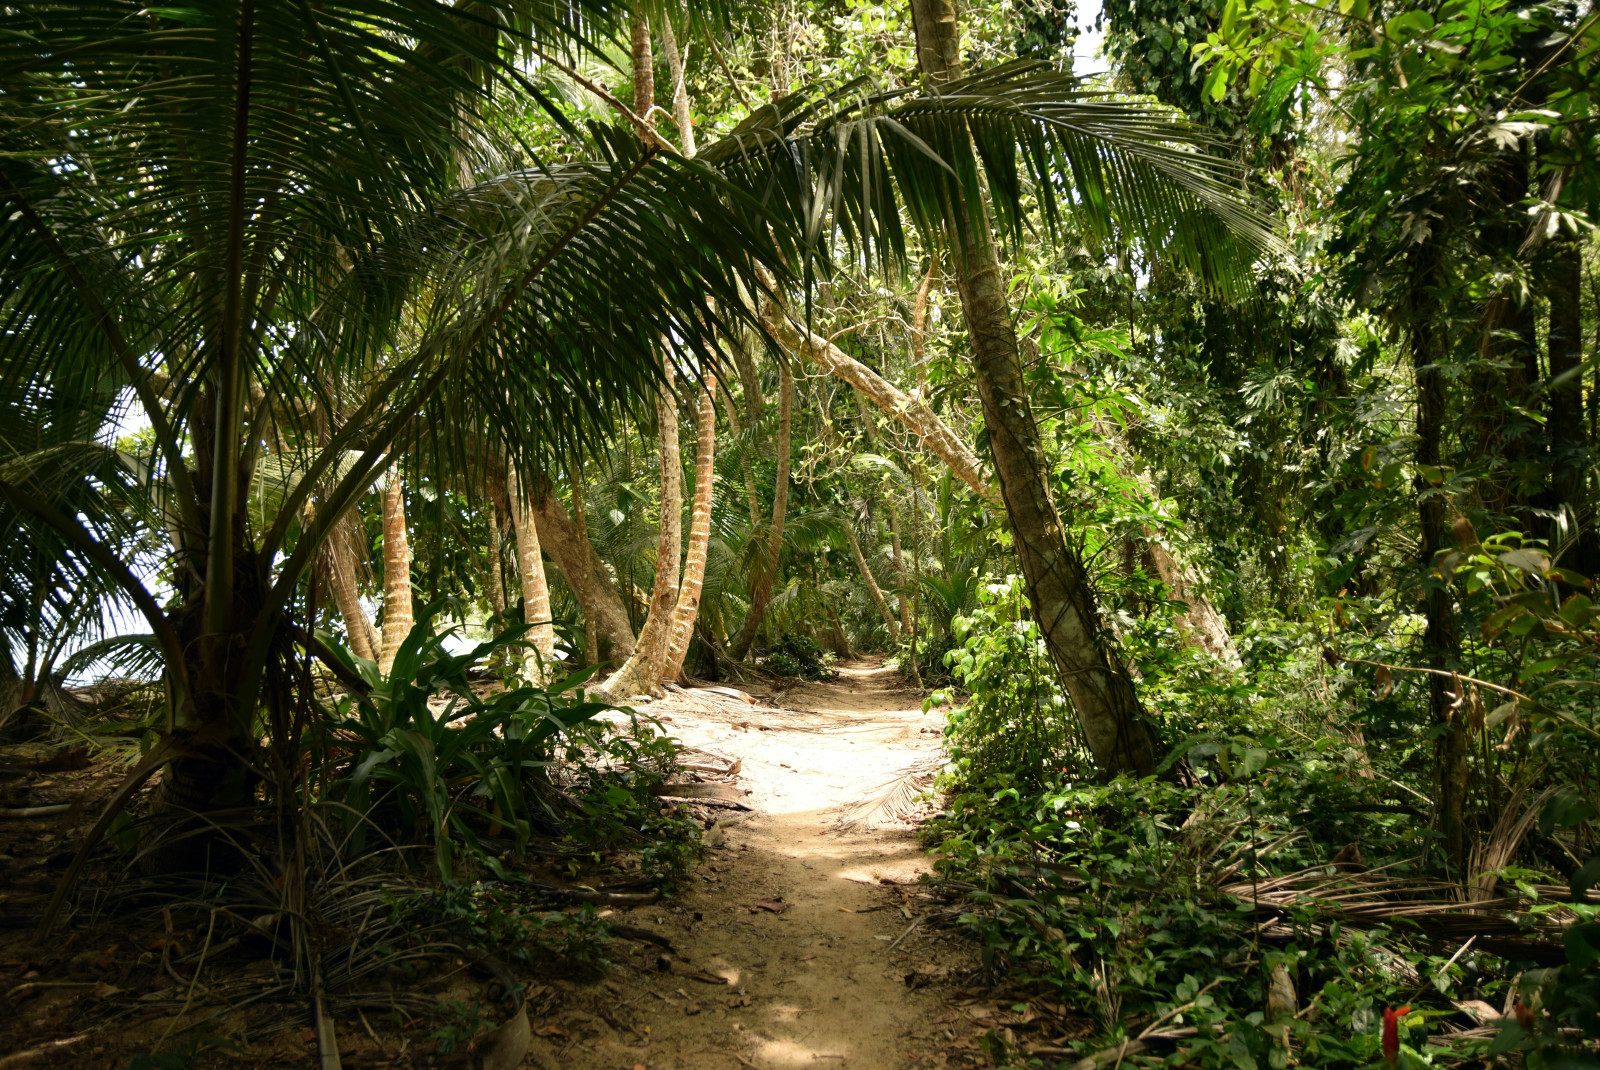 Pathway in the forest surrounded by trees during daytime